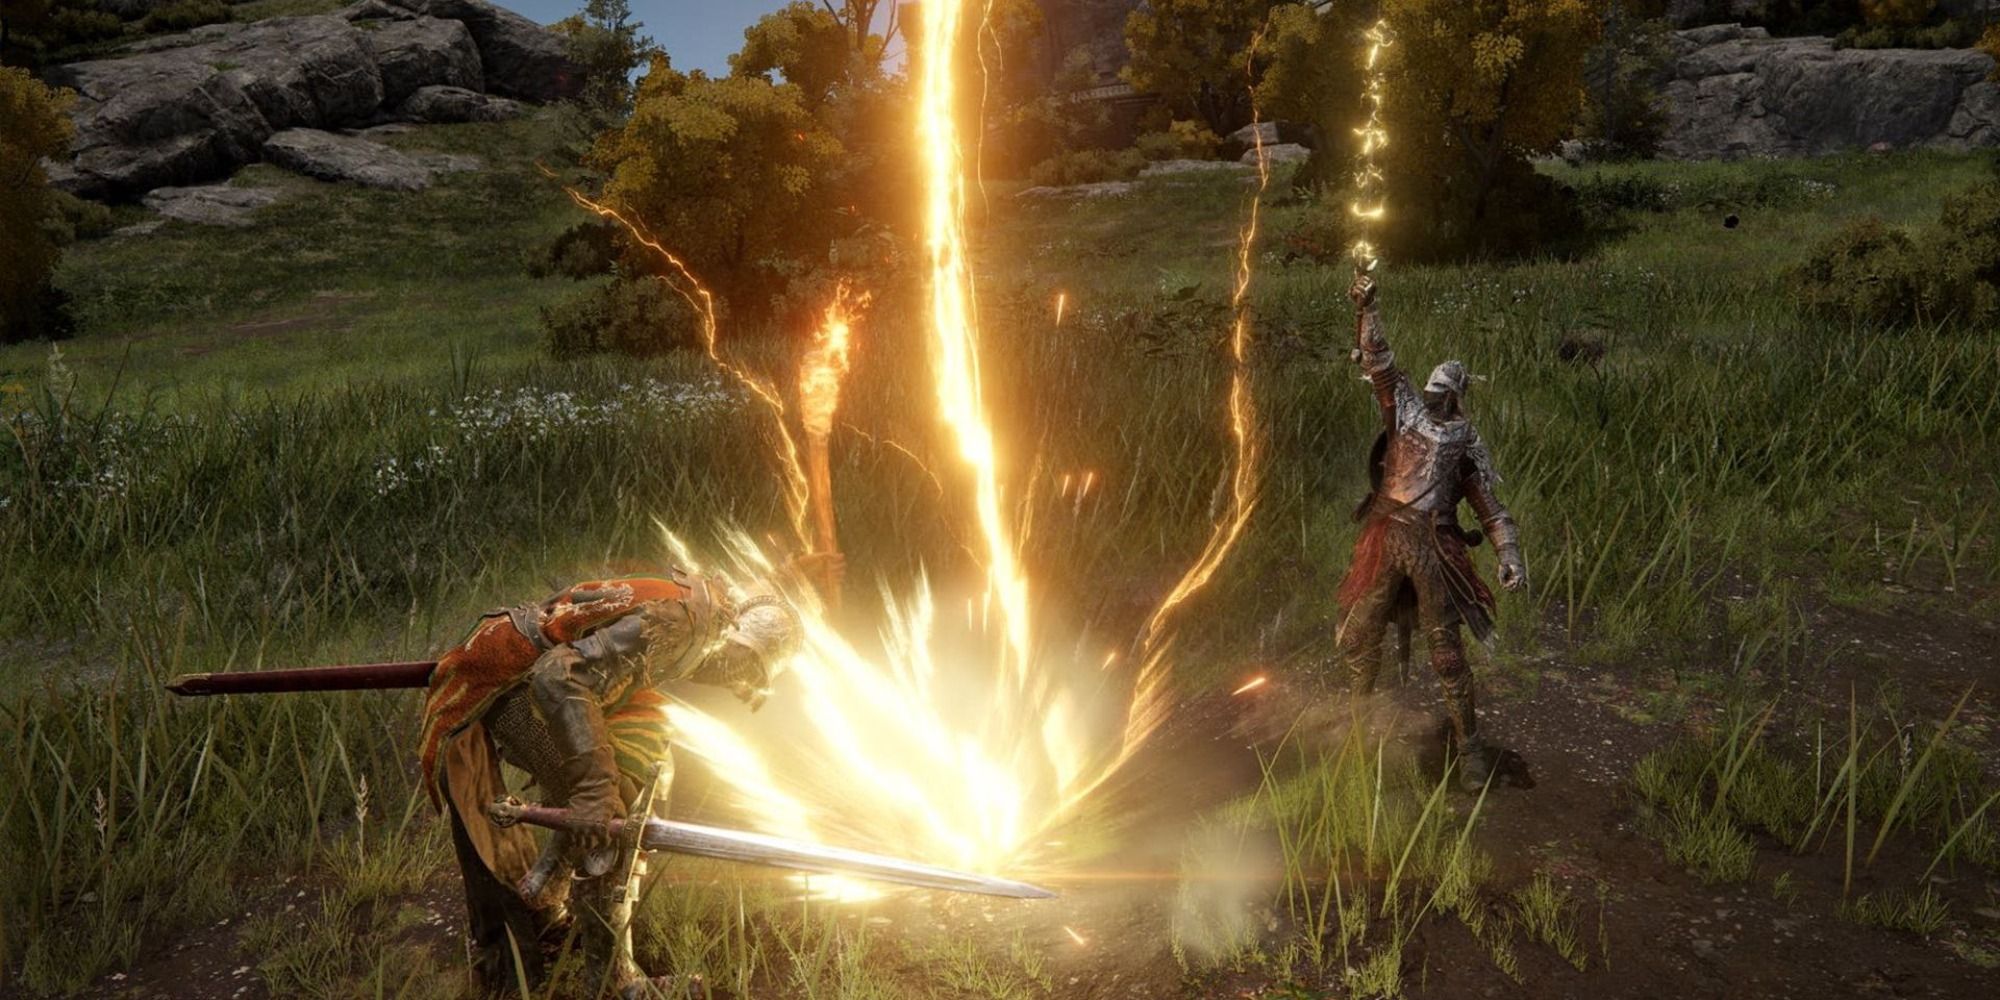 The player casting lightening from their sword with Ashes of War in Elden Ring